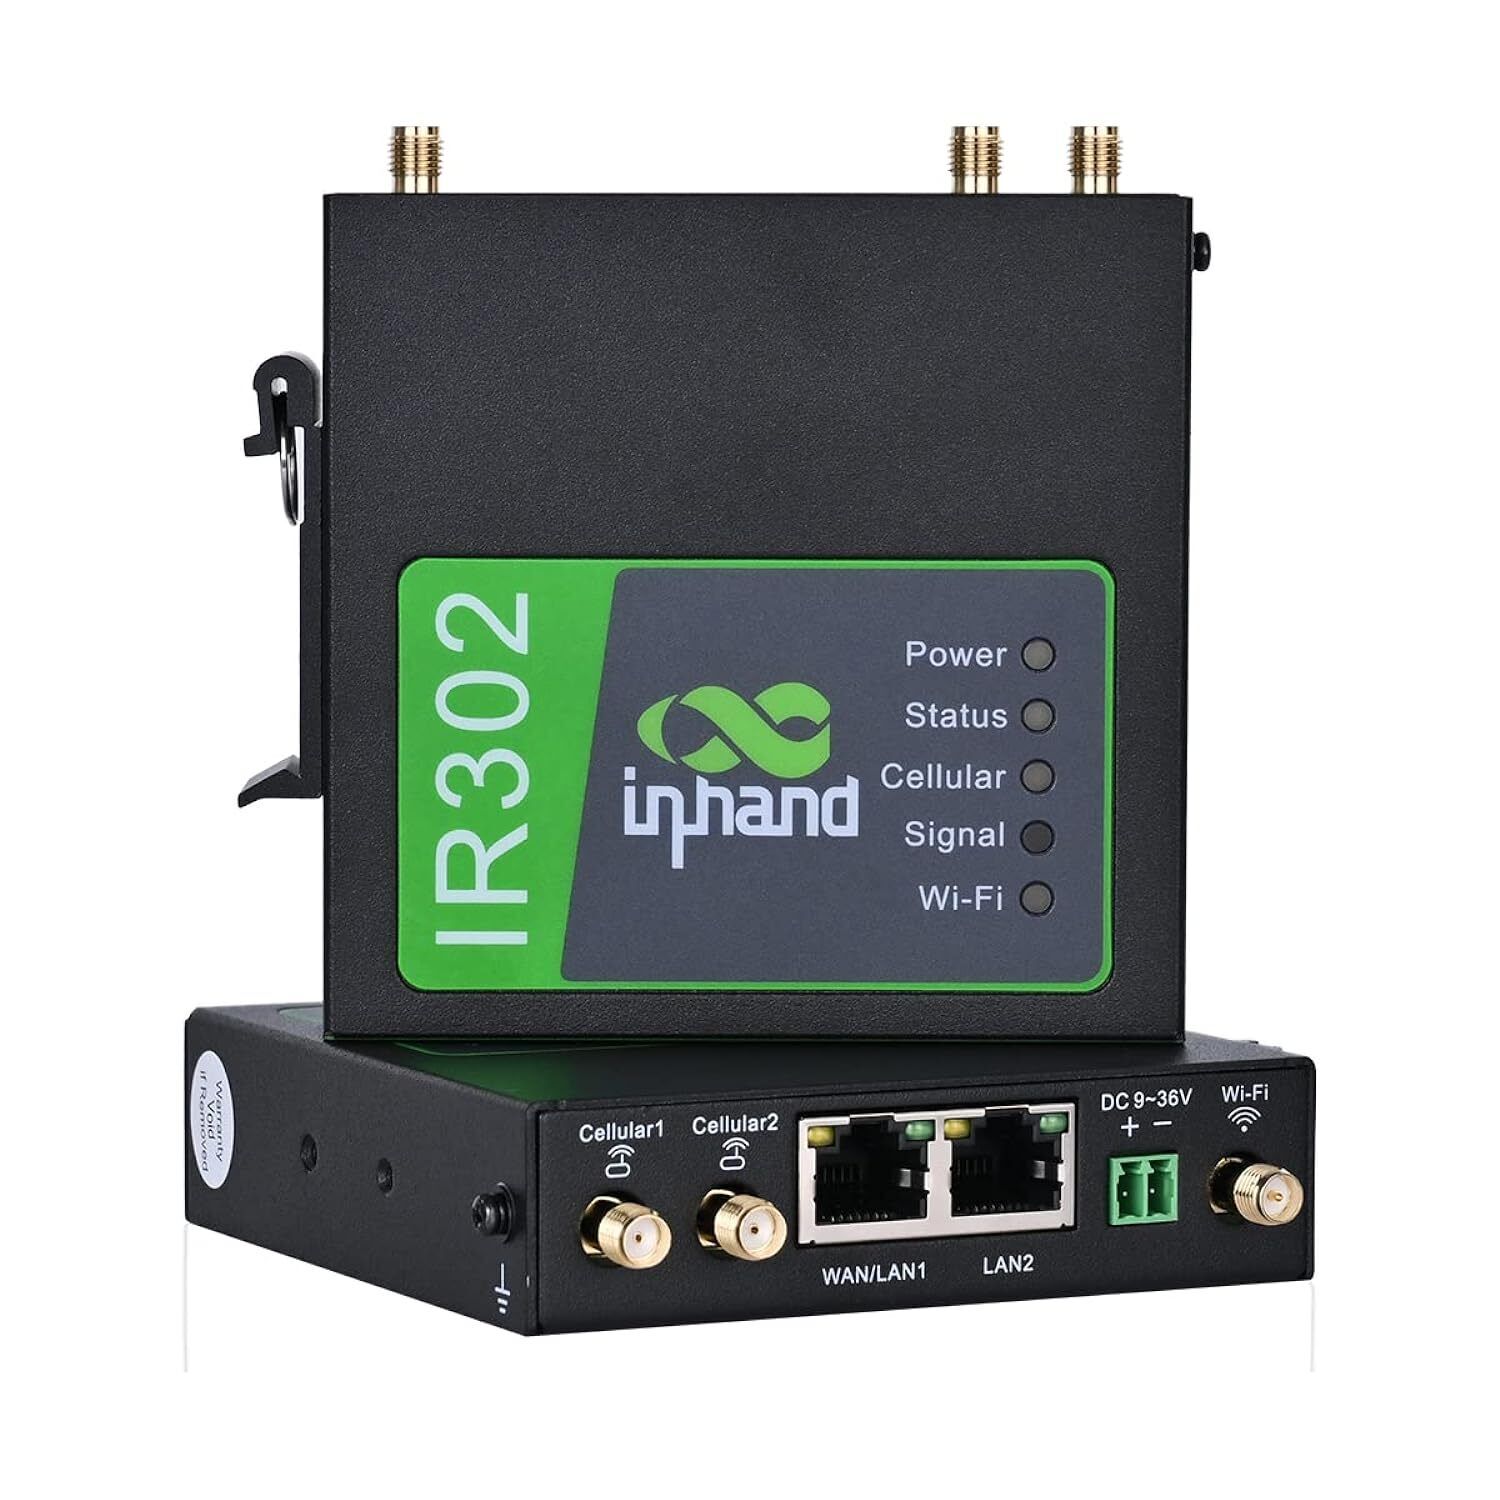 Inhand Networks Ir302 Industrial Iot Lte 4G Vpn Router,Lte Cat 4+ Wi-Fi, Dual